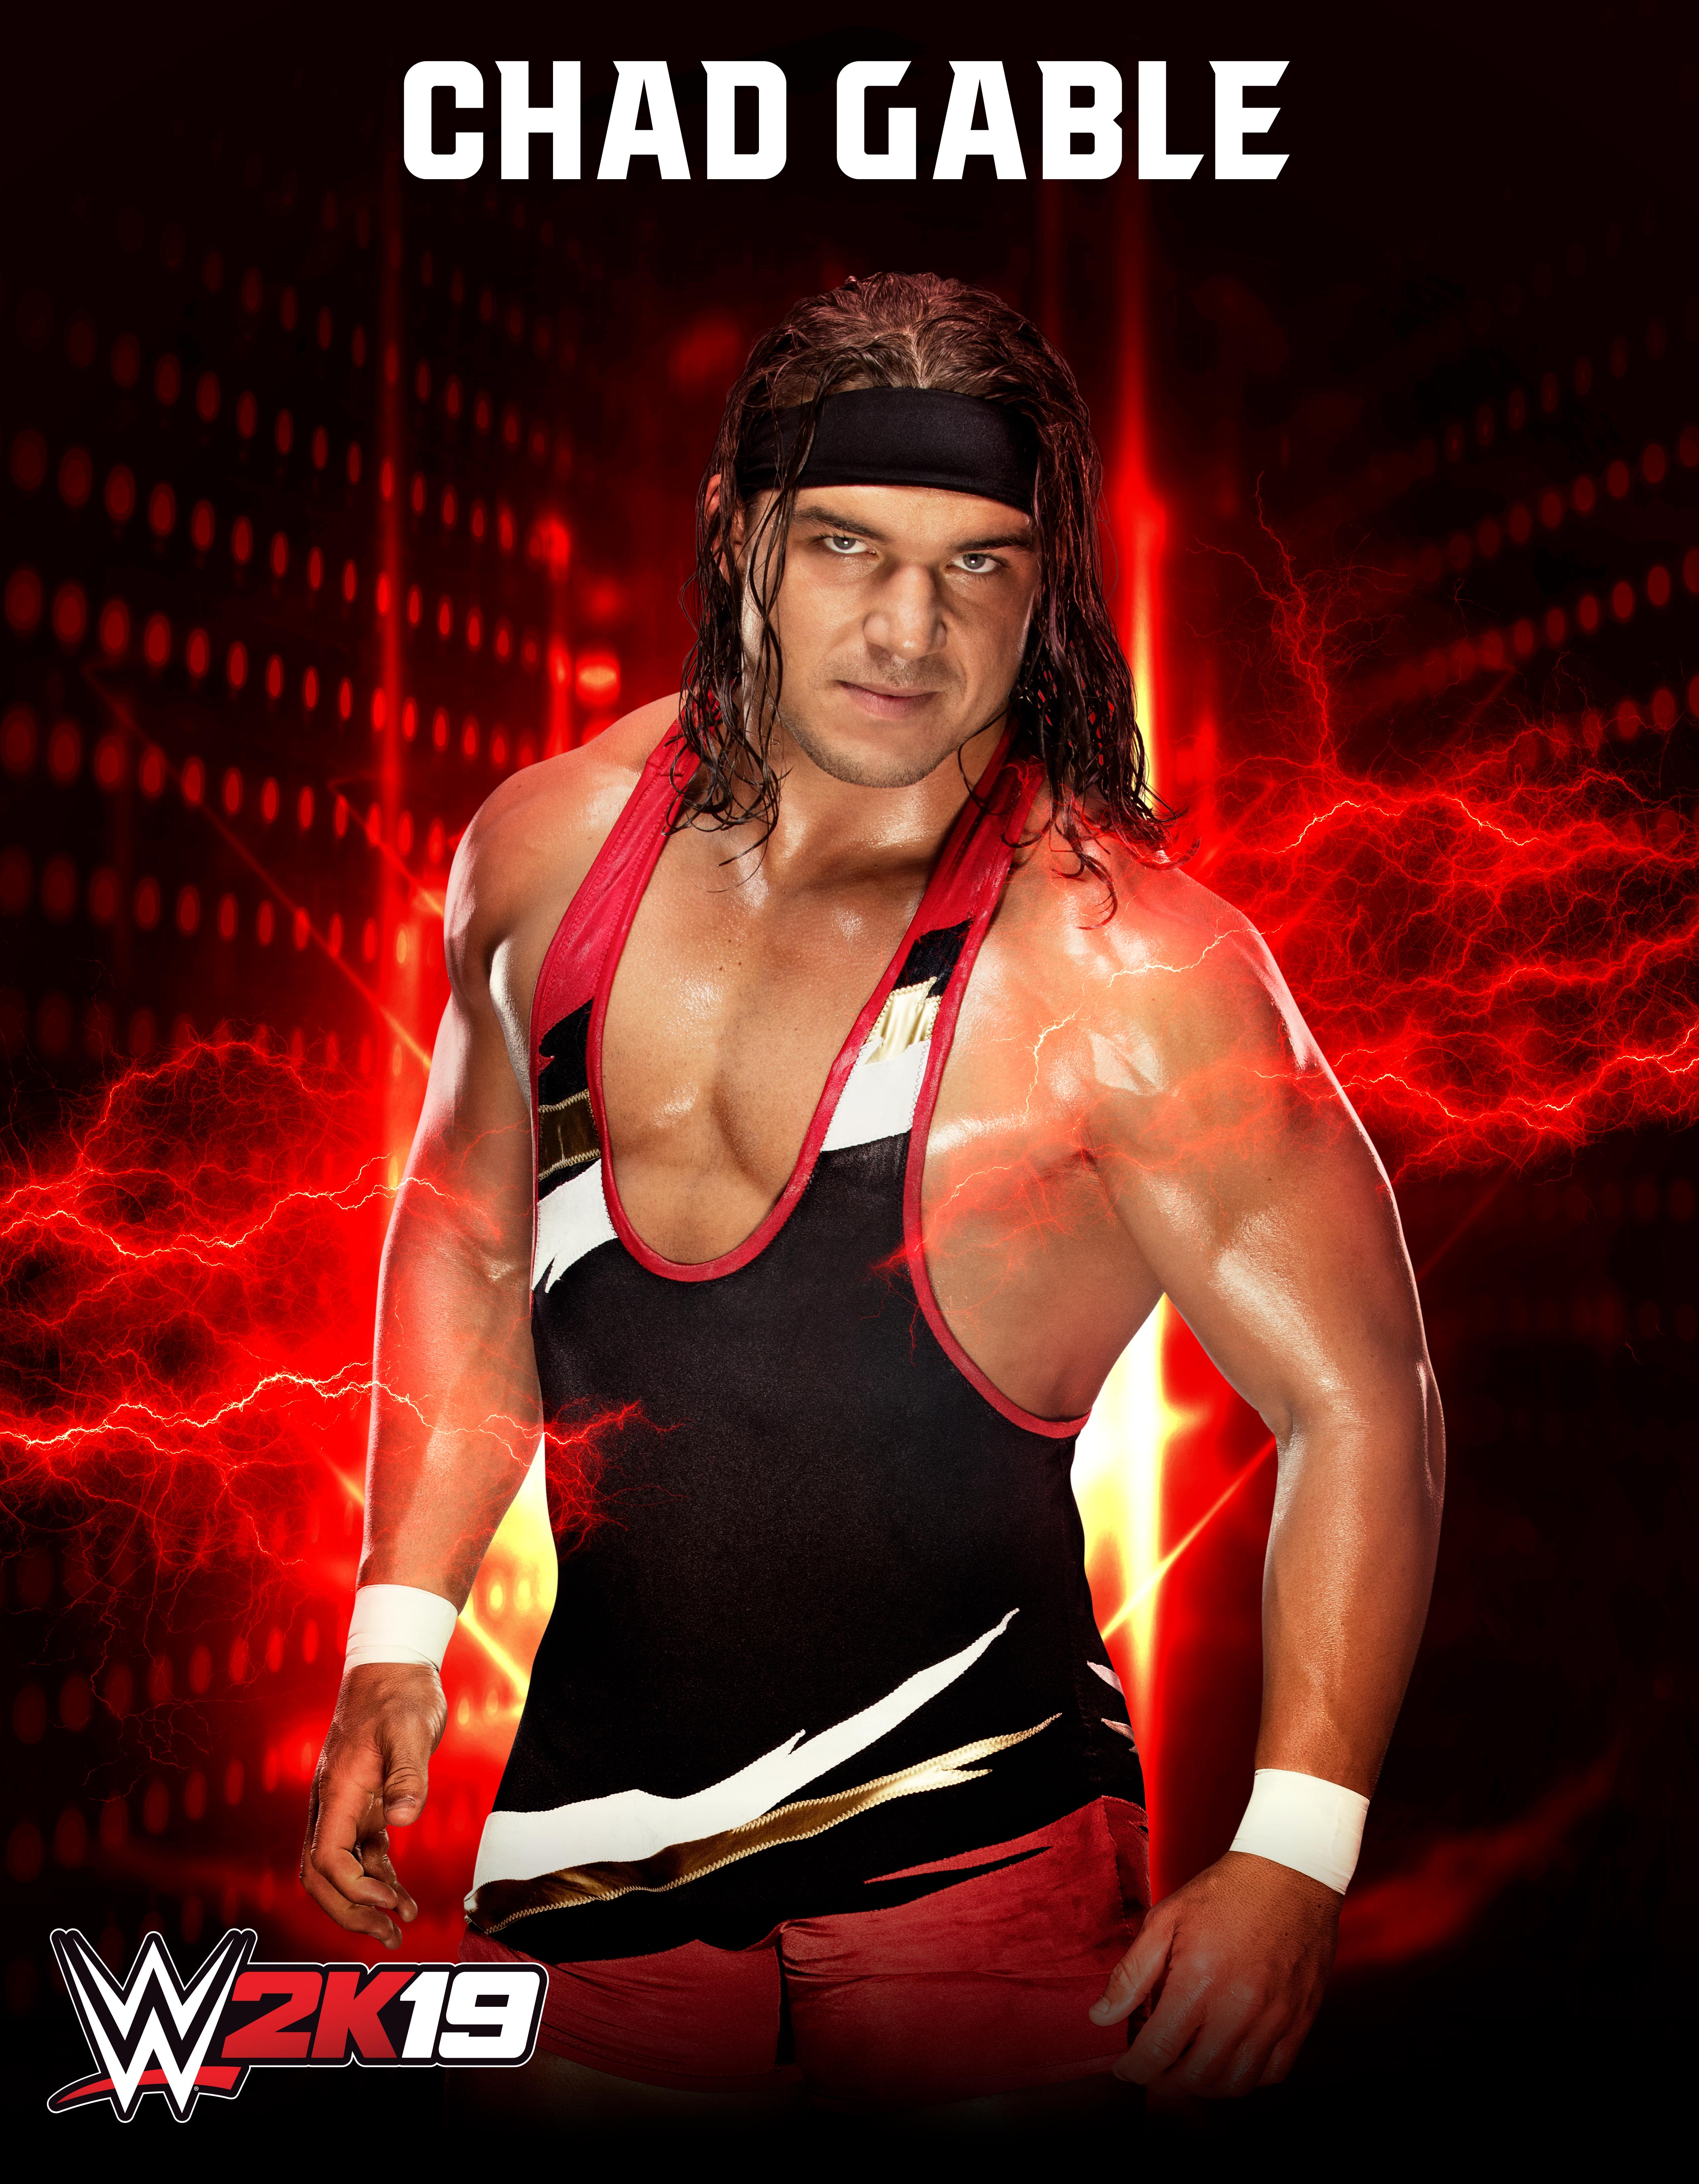 Wwe2k19 Roster Chad Gable